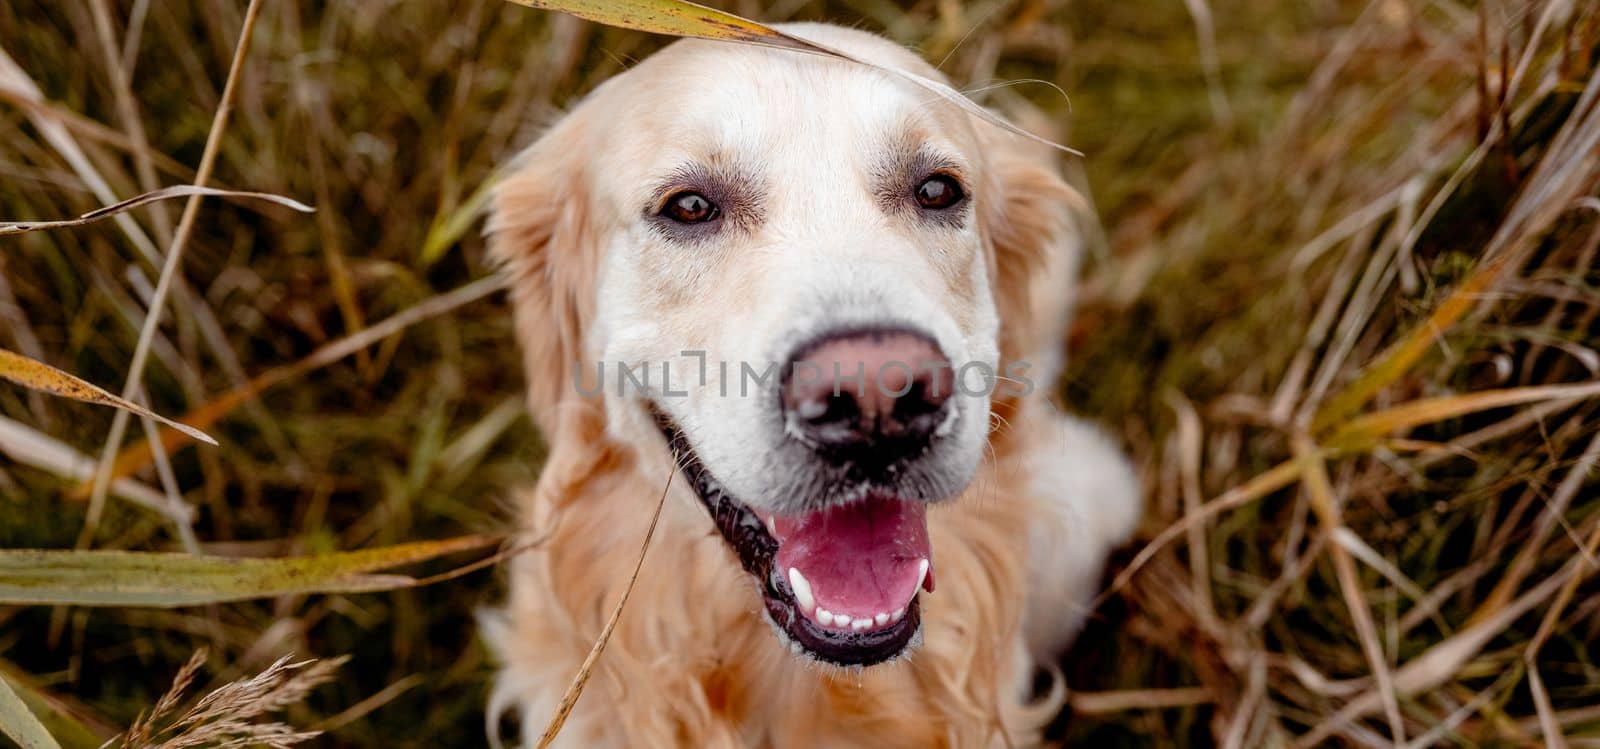 Golden retriever dog resting in grass outdoors. Purebred doggy pet labrador lying in nature with tonque out